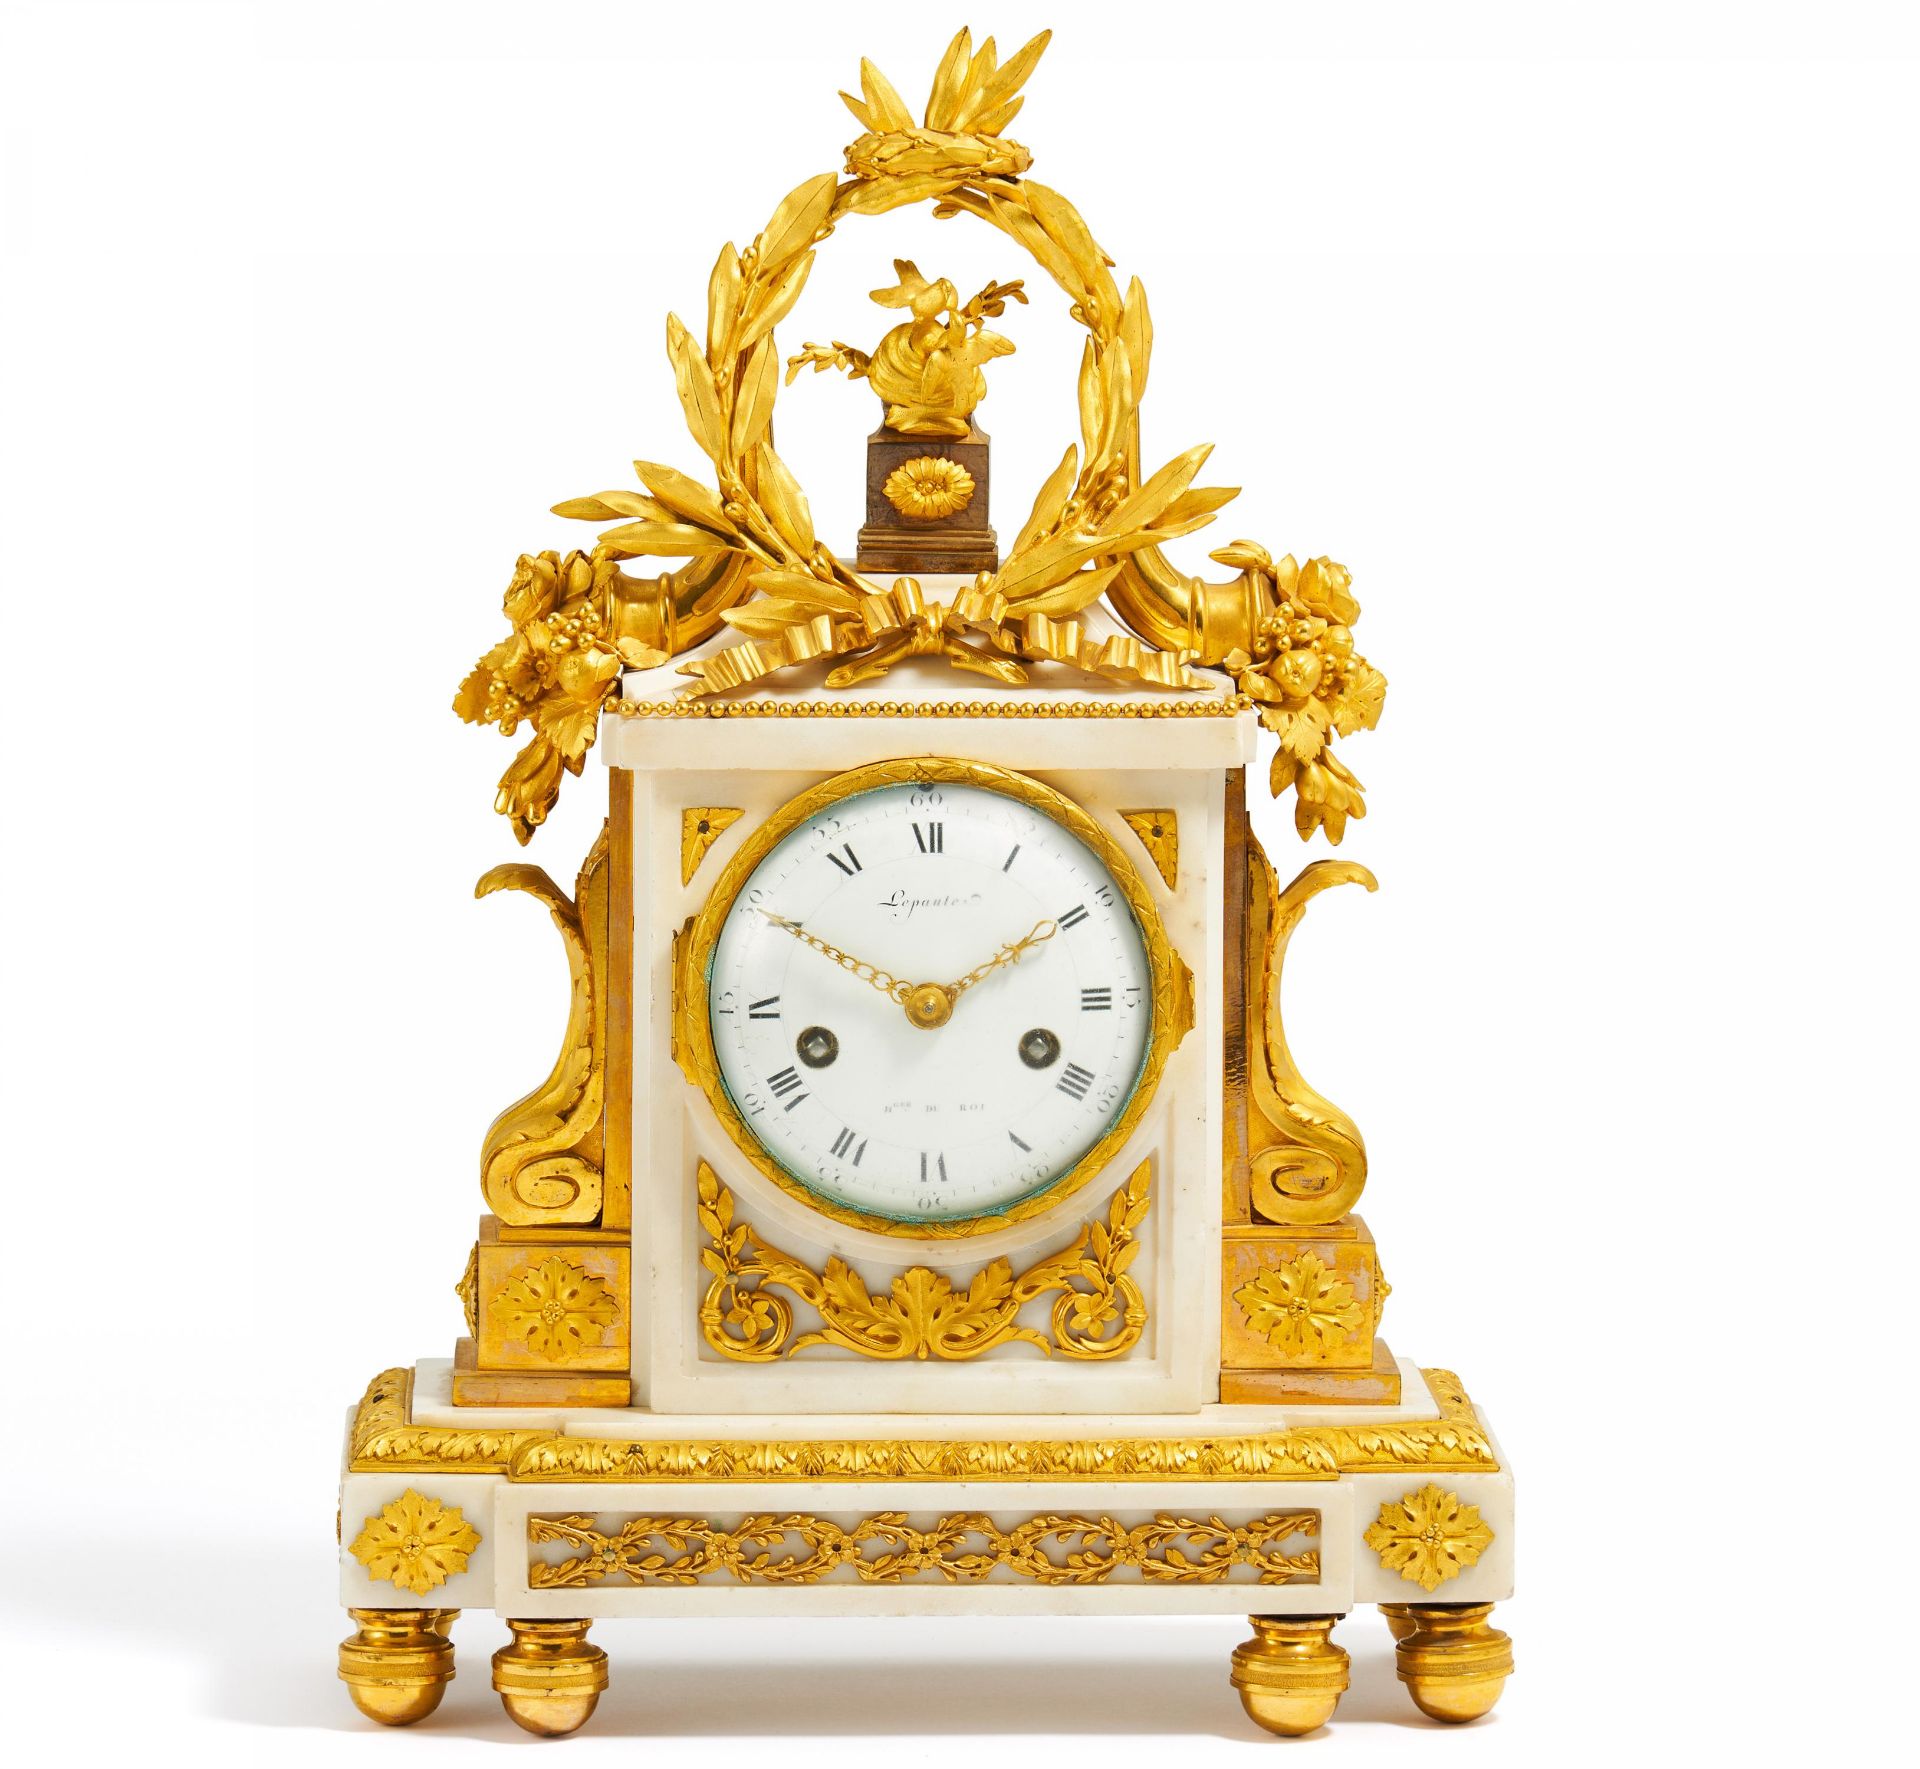 WHITE MARBLE AND GILDED BRONZE PENDULUM CLOCK LOUIS XVI. Paris. Jean-André Lepaute. White marble and